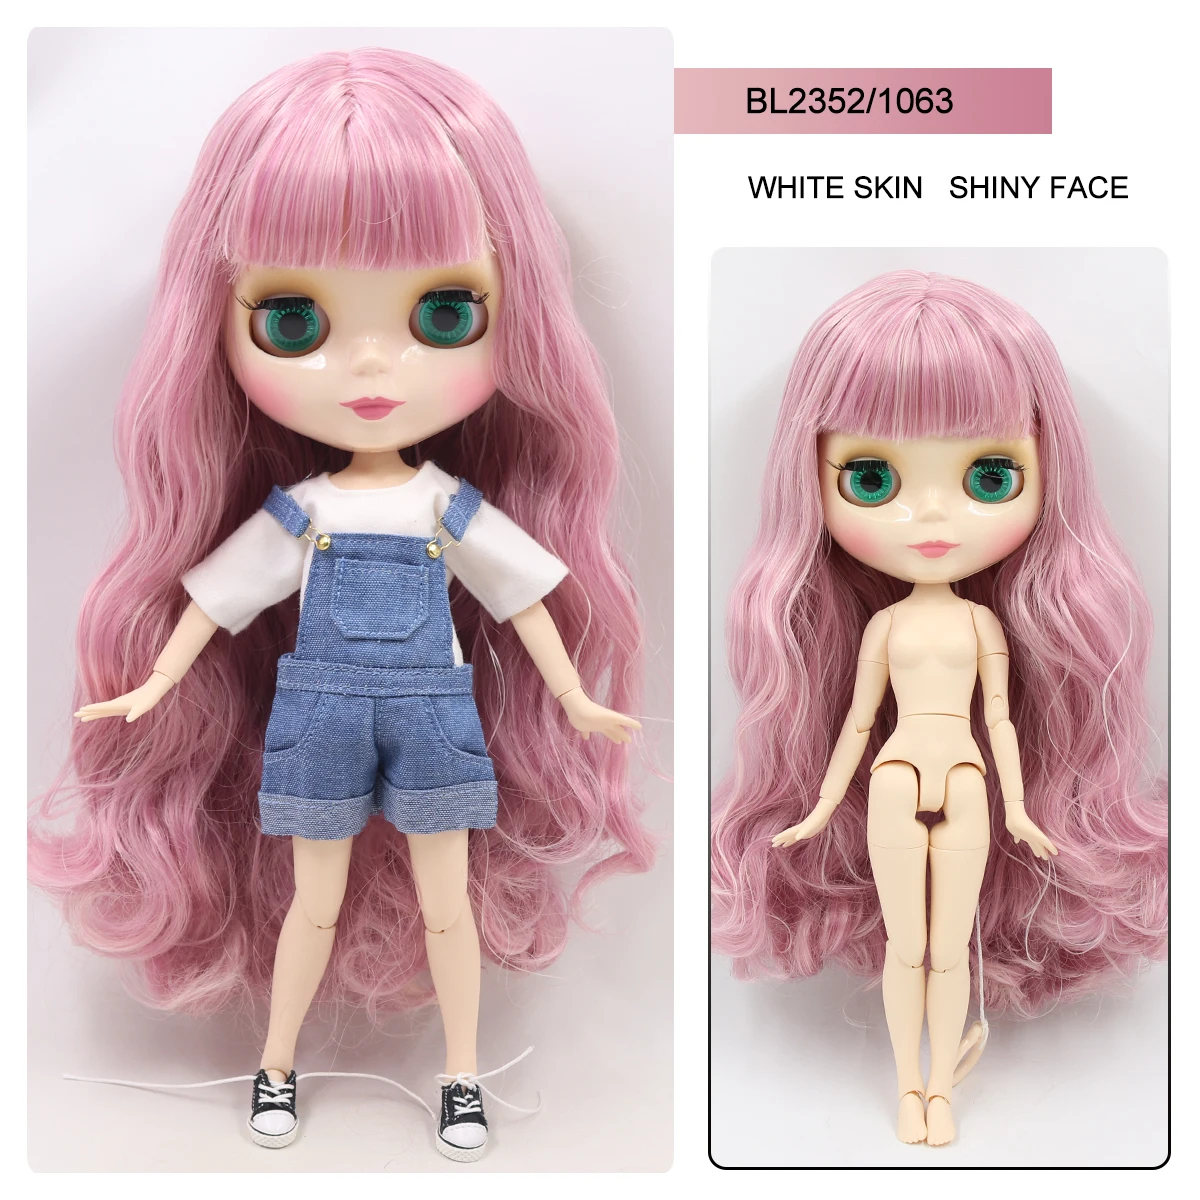 Neo Blythe Doll with Pink Hair, White Skin, Shiny Cute Face & Factory Jointed Body 2